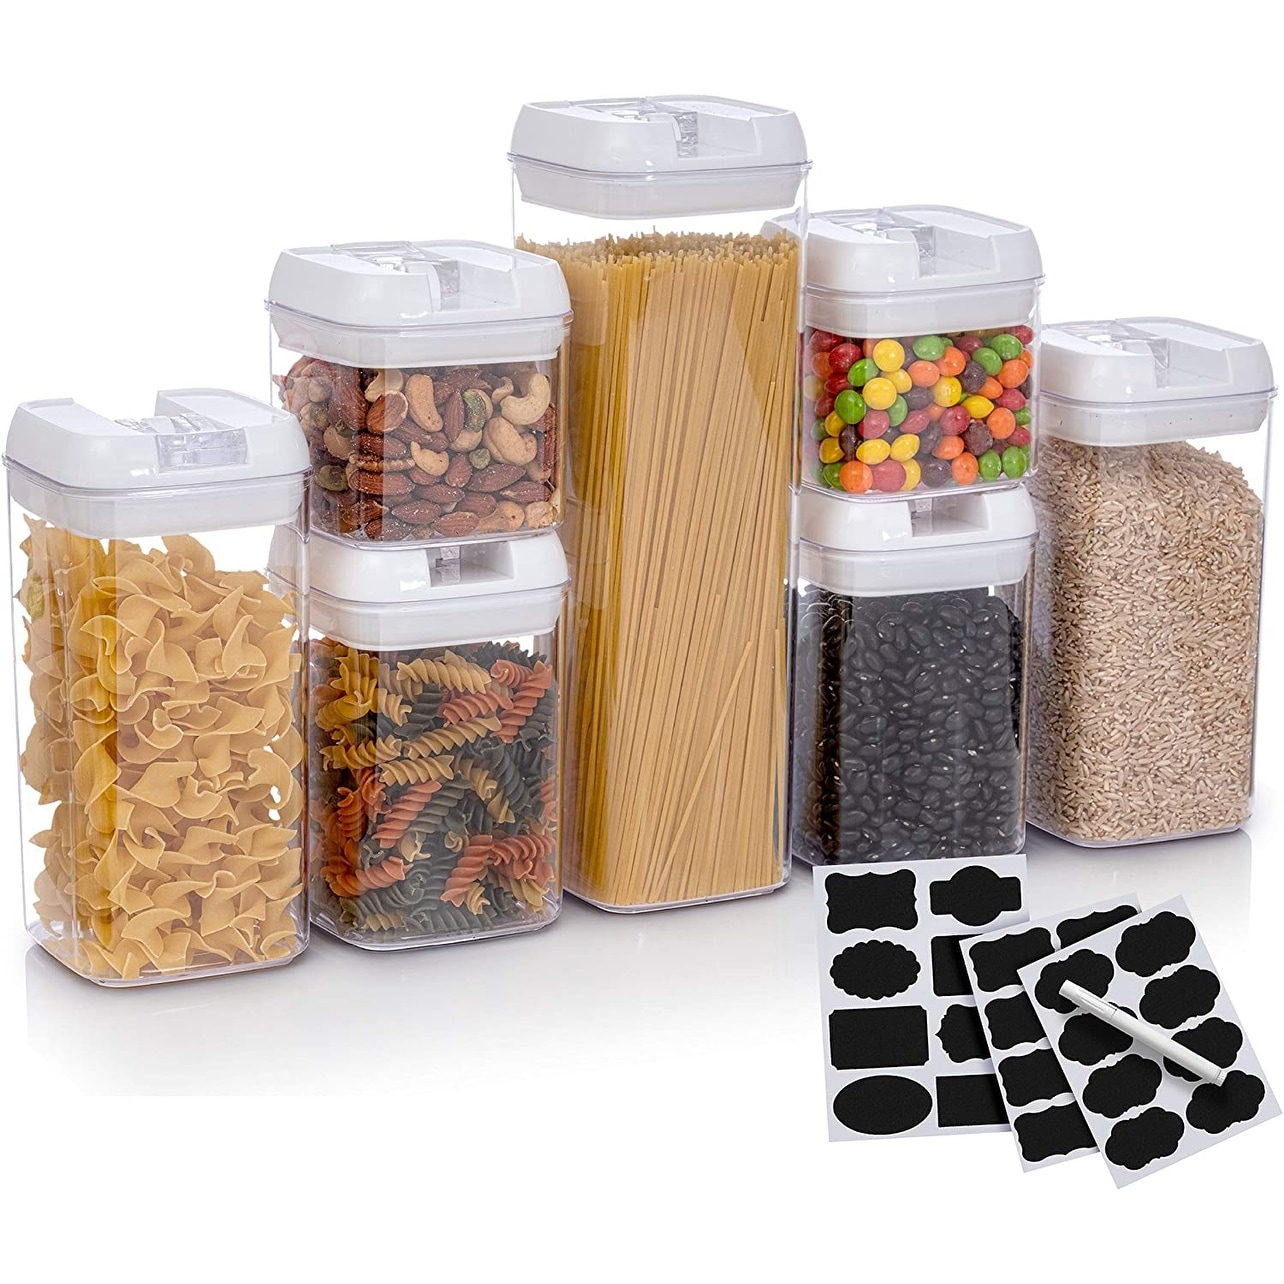 https://ak1.ostkcdn.com/images/products/is/images/direct/4ac1ecc20b9eff19b5ee8550139986077f9cdf31/Cheer-Collection-Set-of-7-Airtight-Food-Storage-Containers.jpg